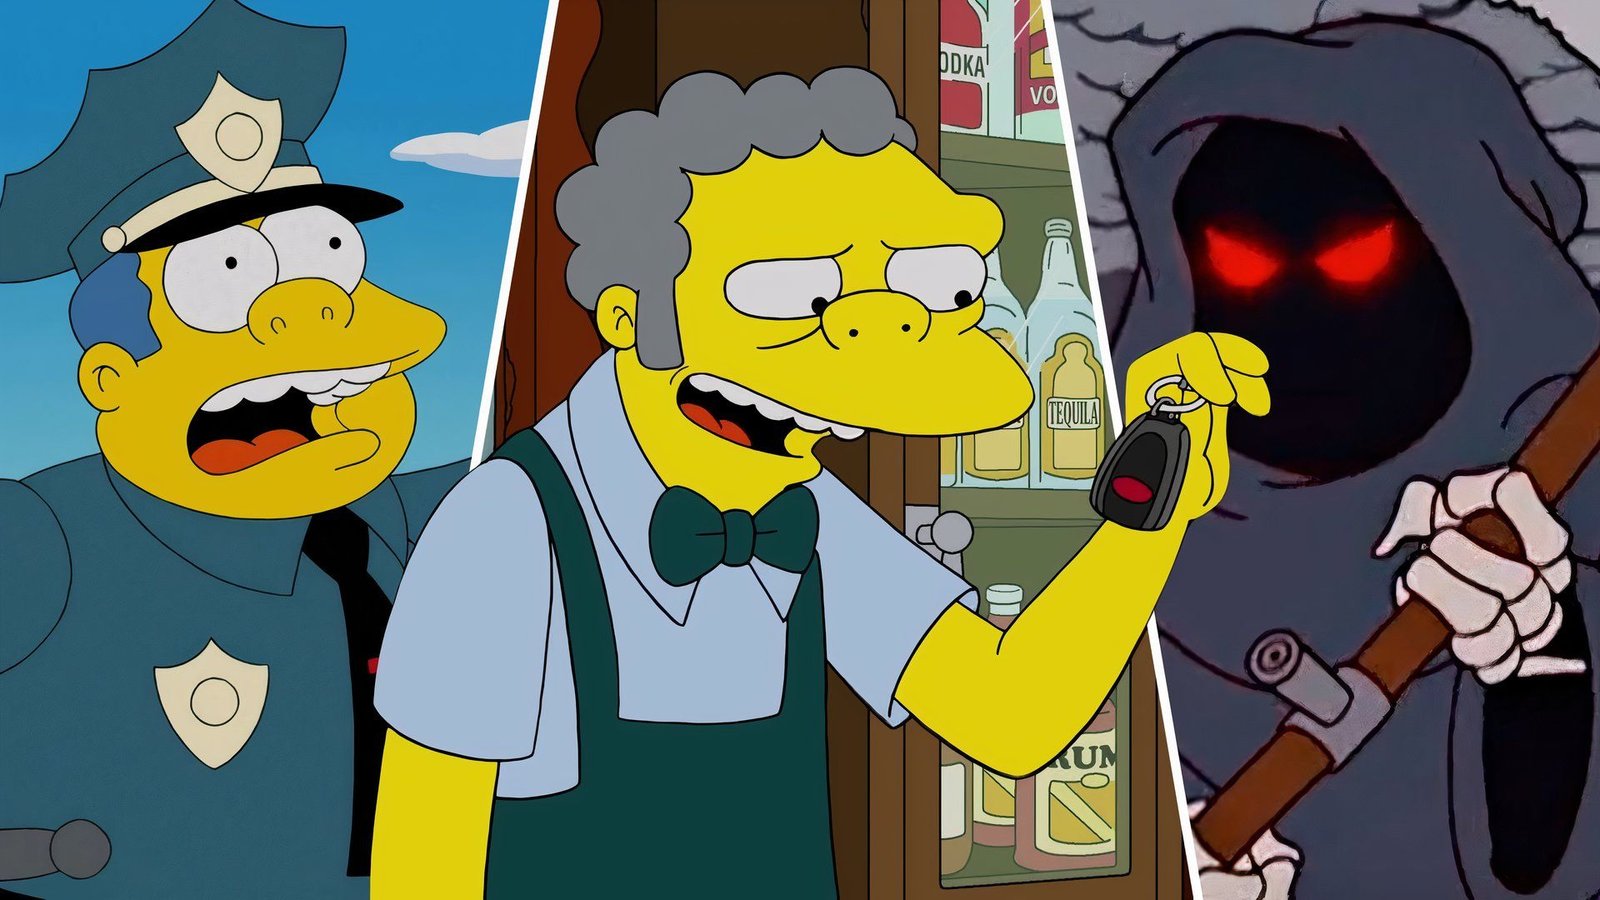 Every Simpsons Character Voiced by Hank Azaria, Broken Down by Season